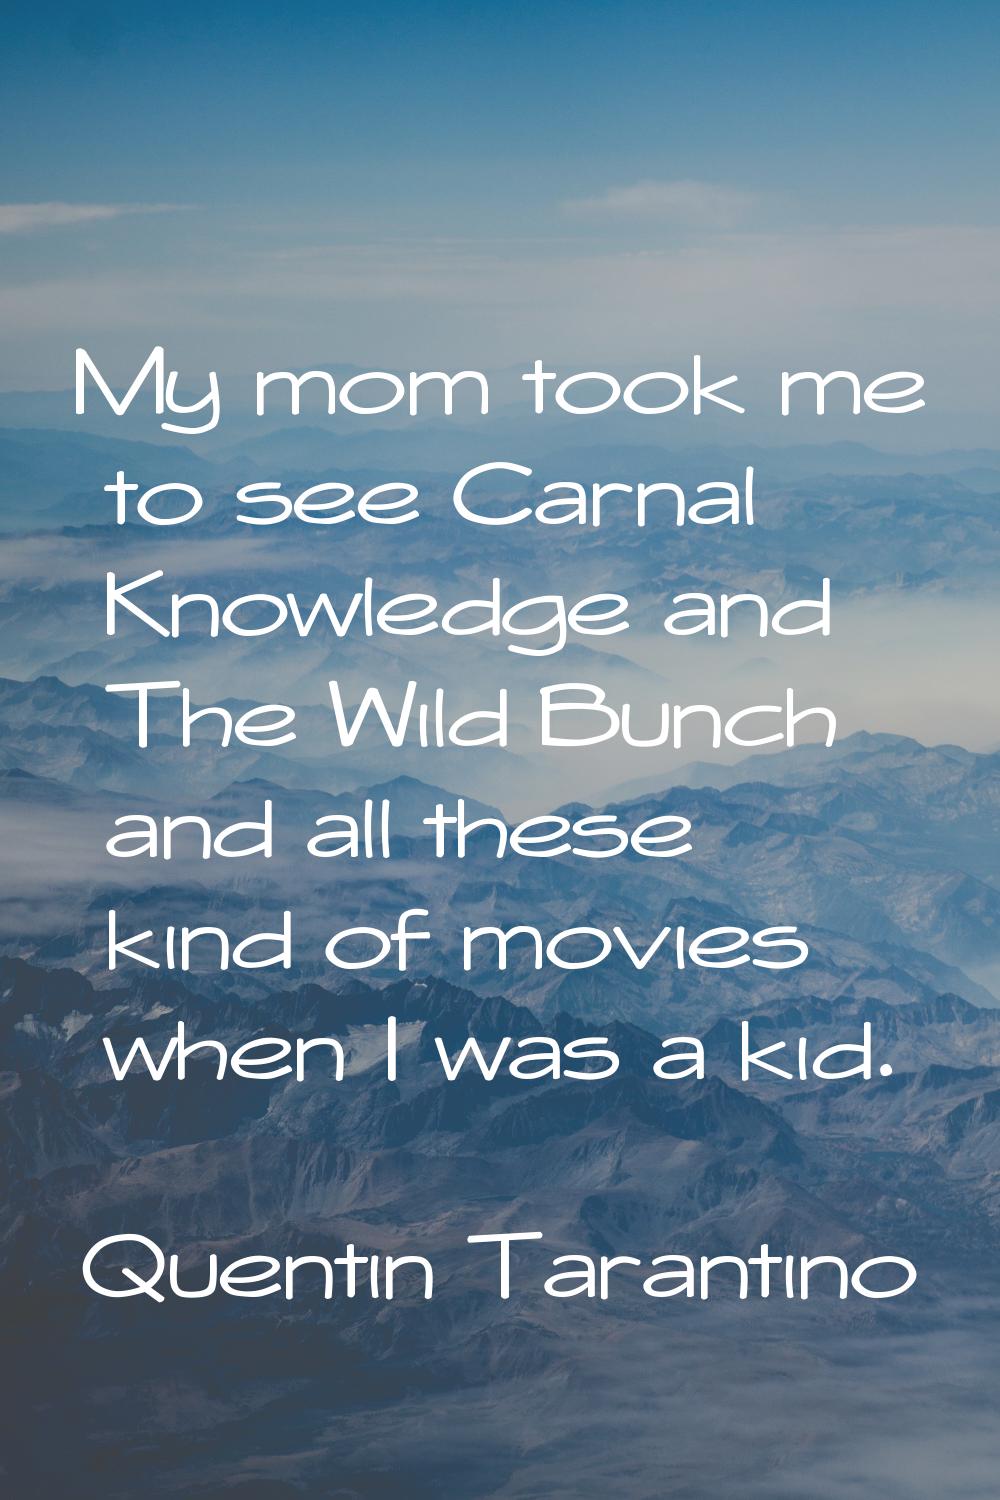 My mom took me to see Carnal Knowledge and The Wild Bunch and all these kind of movies when I was a